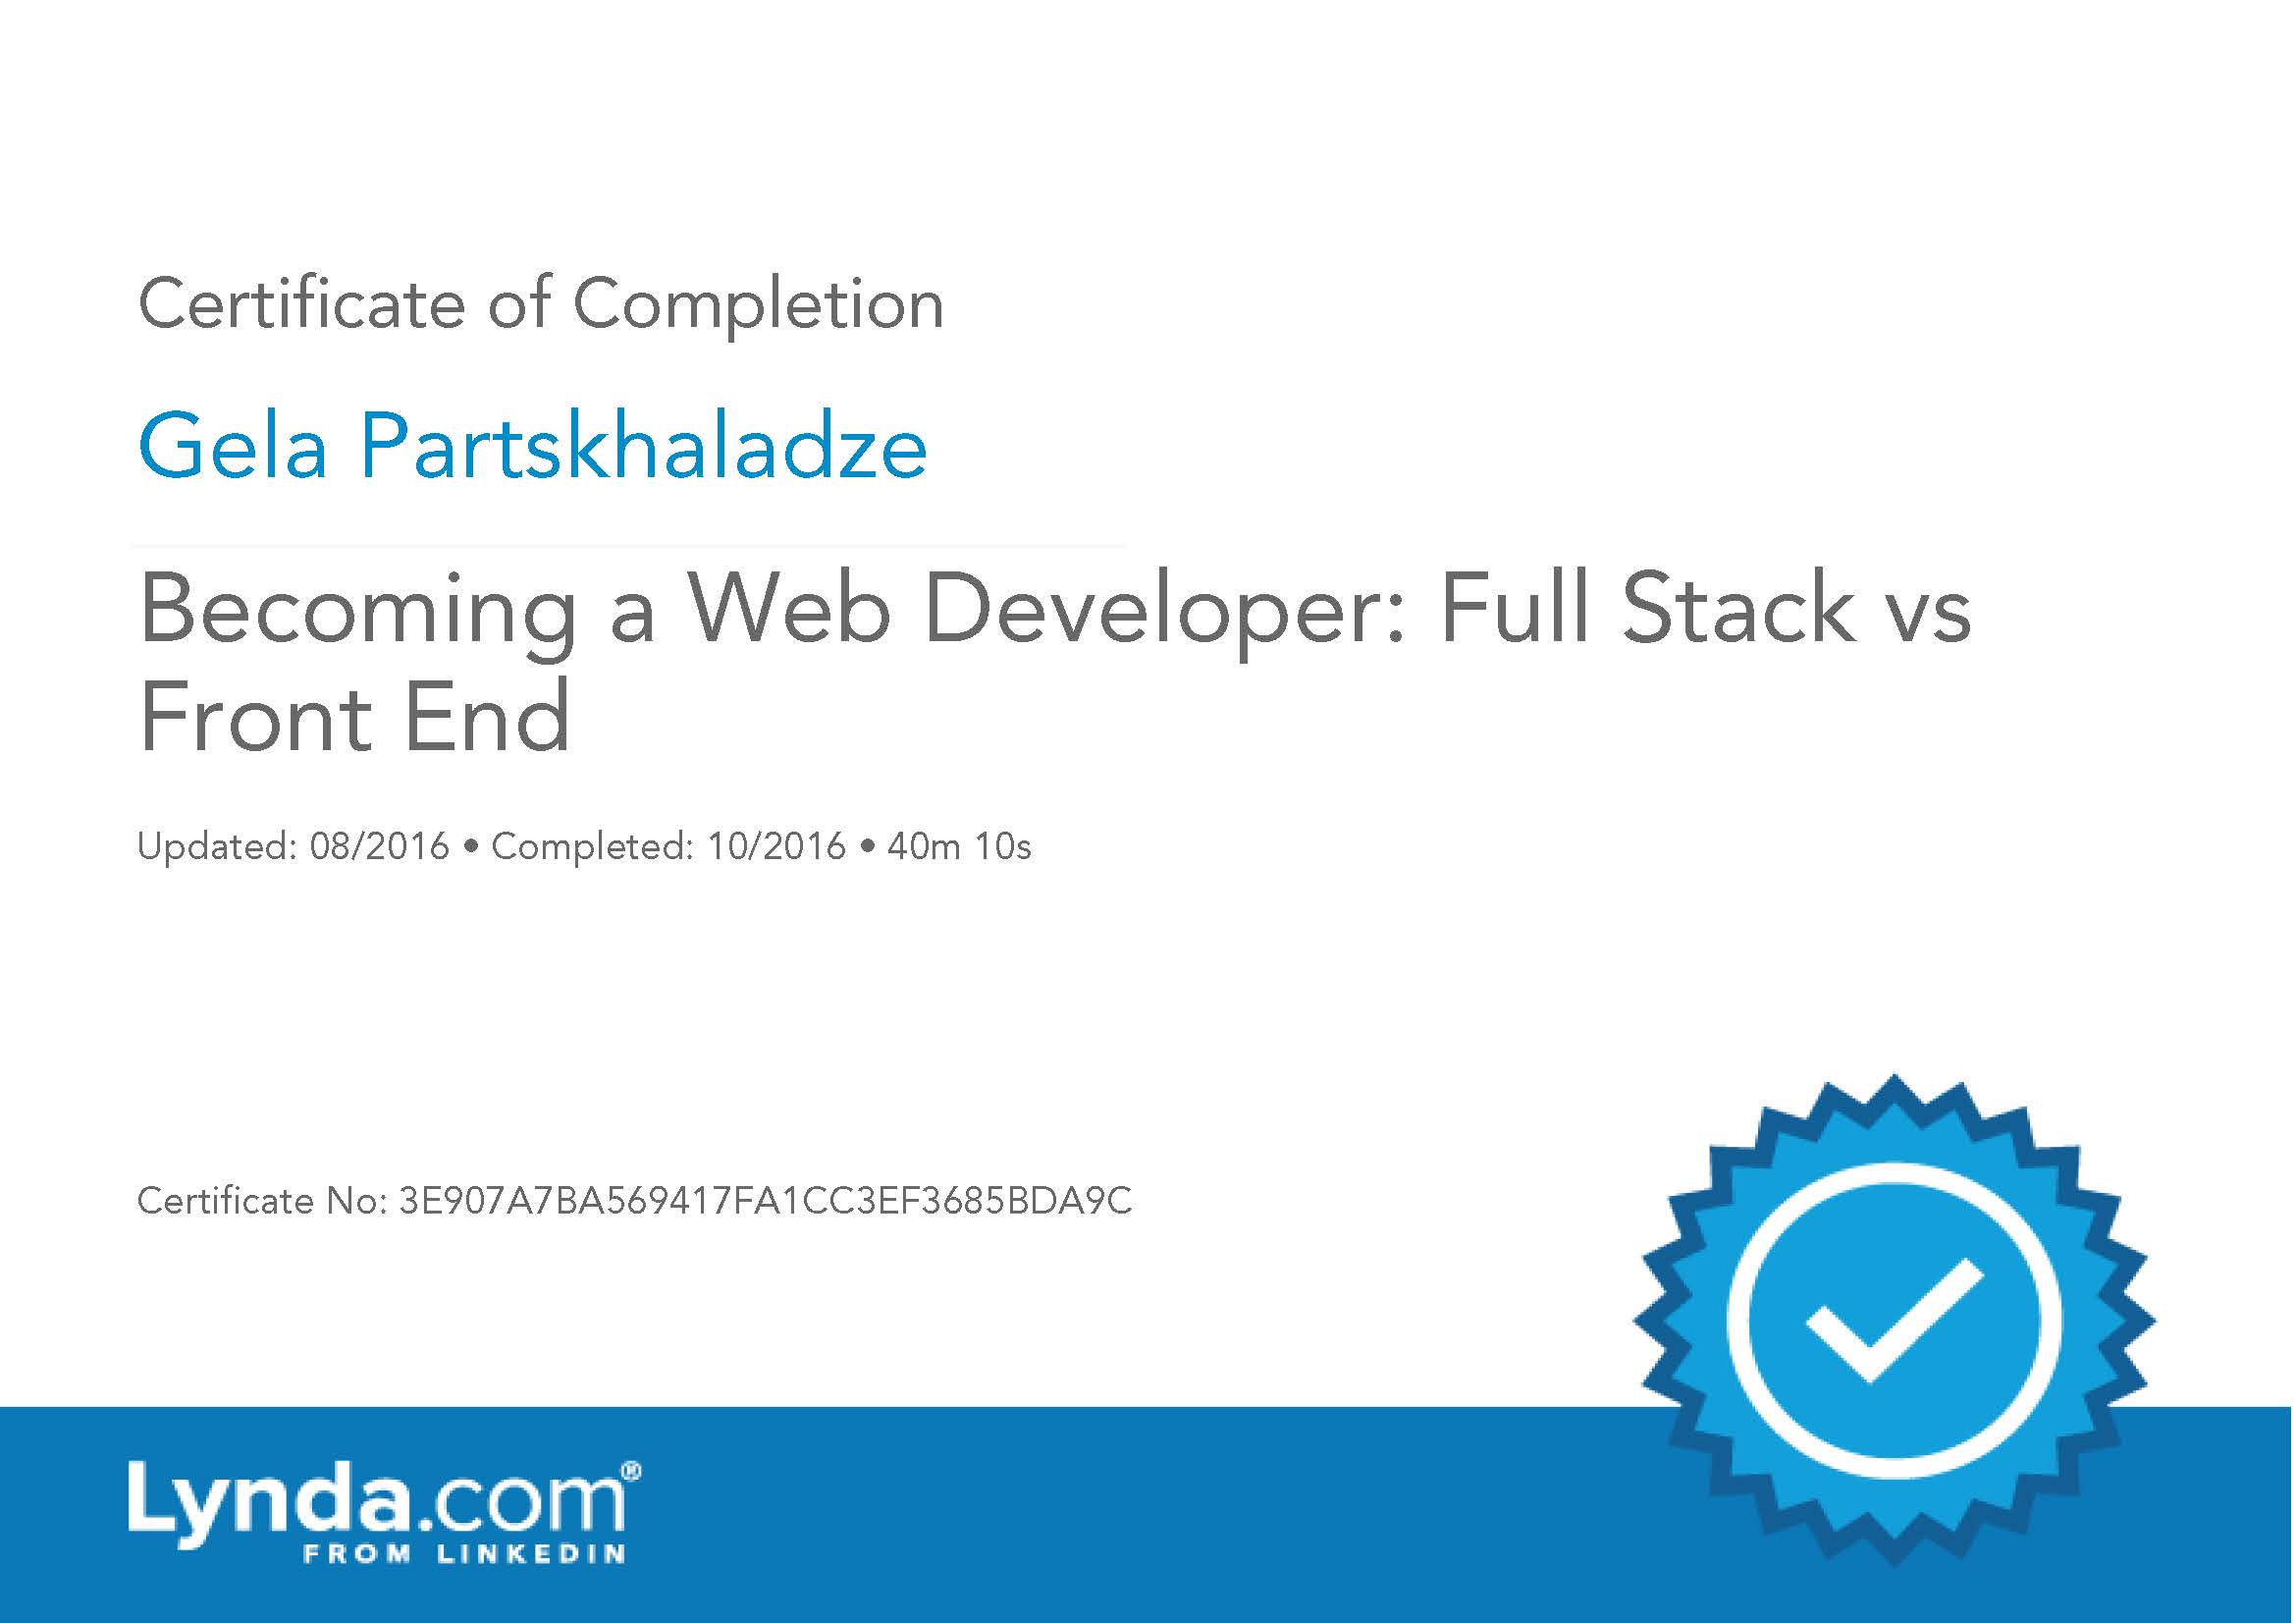 Becoming a Web Developer: Full Stack vs Front End